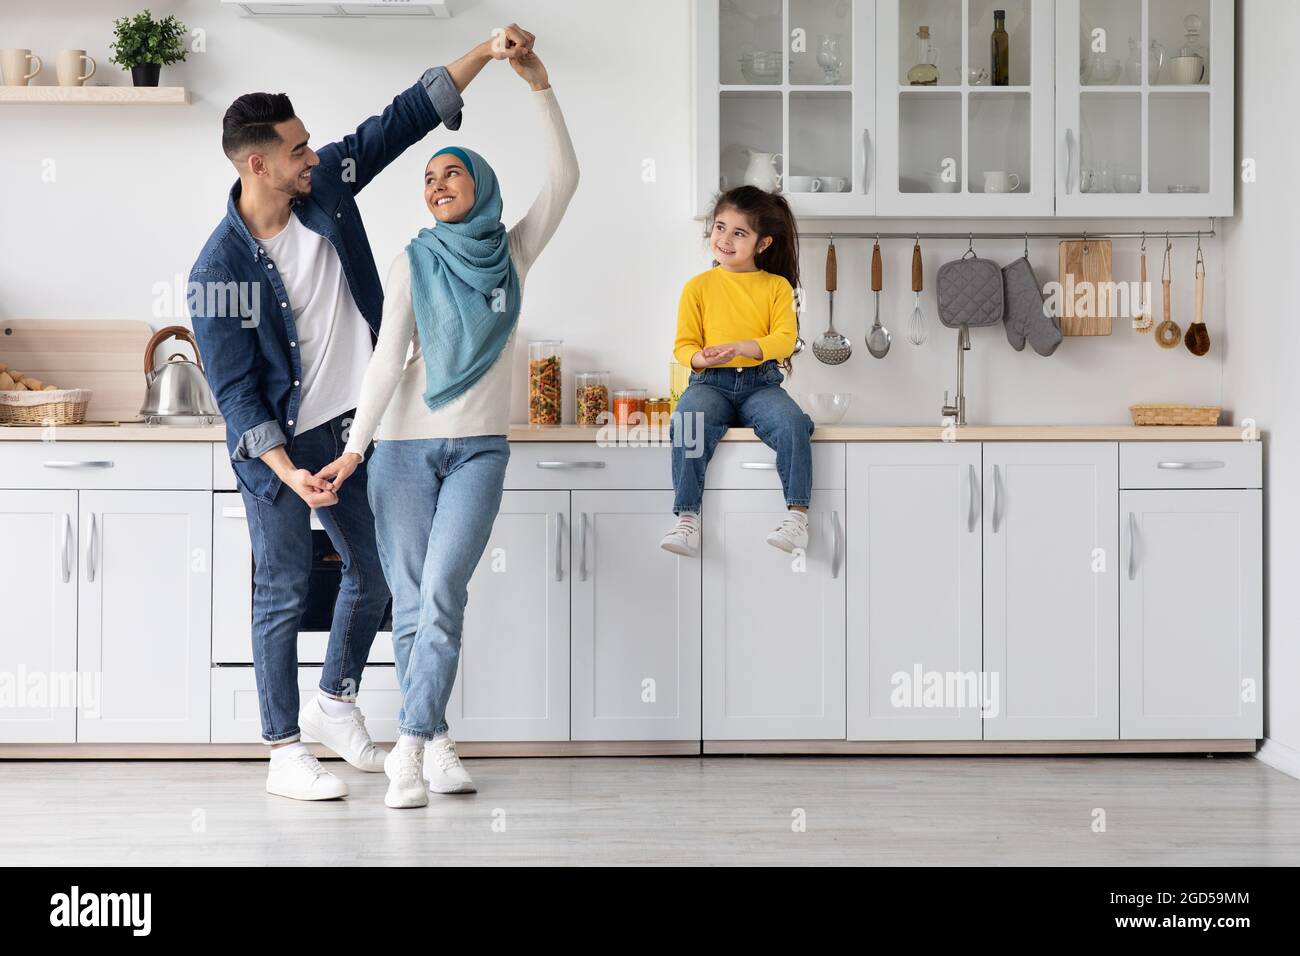 Portrait Of Happy Arab Family Of Three Having Fun In Kitchen Interior, Cute Smiling Little Middle Eastern Girl Sitting On Table And Watching Her Paren Stock Photo